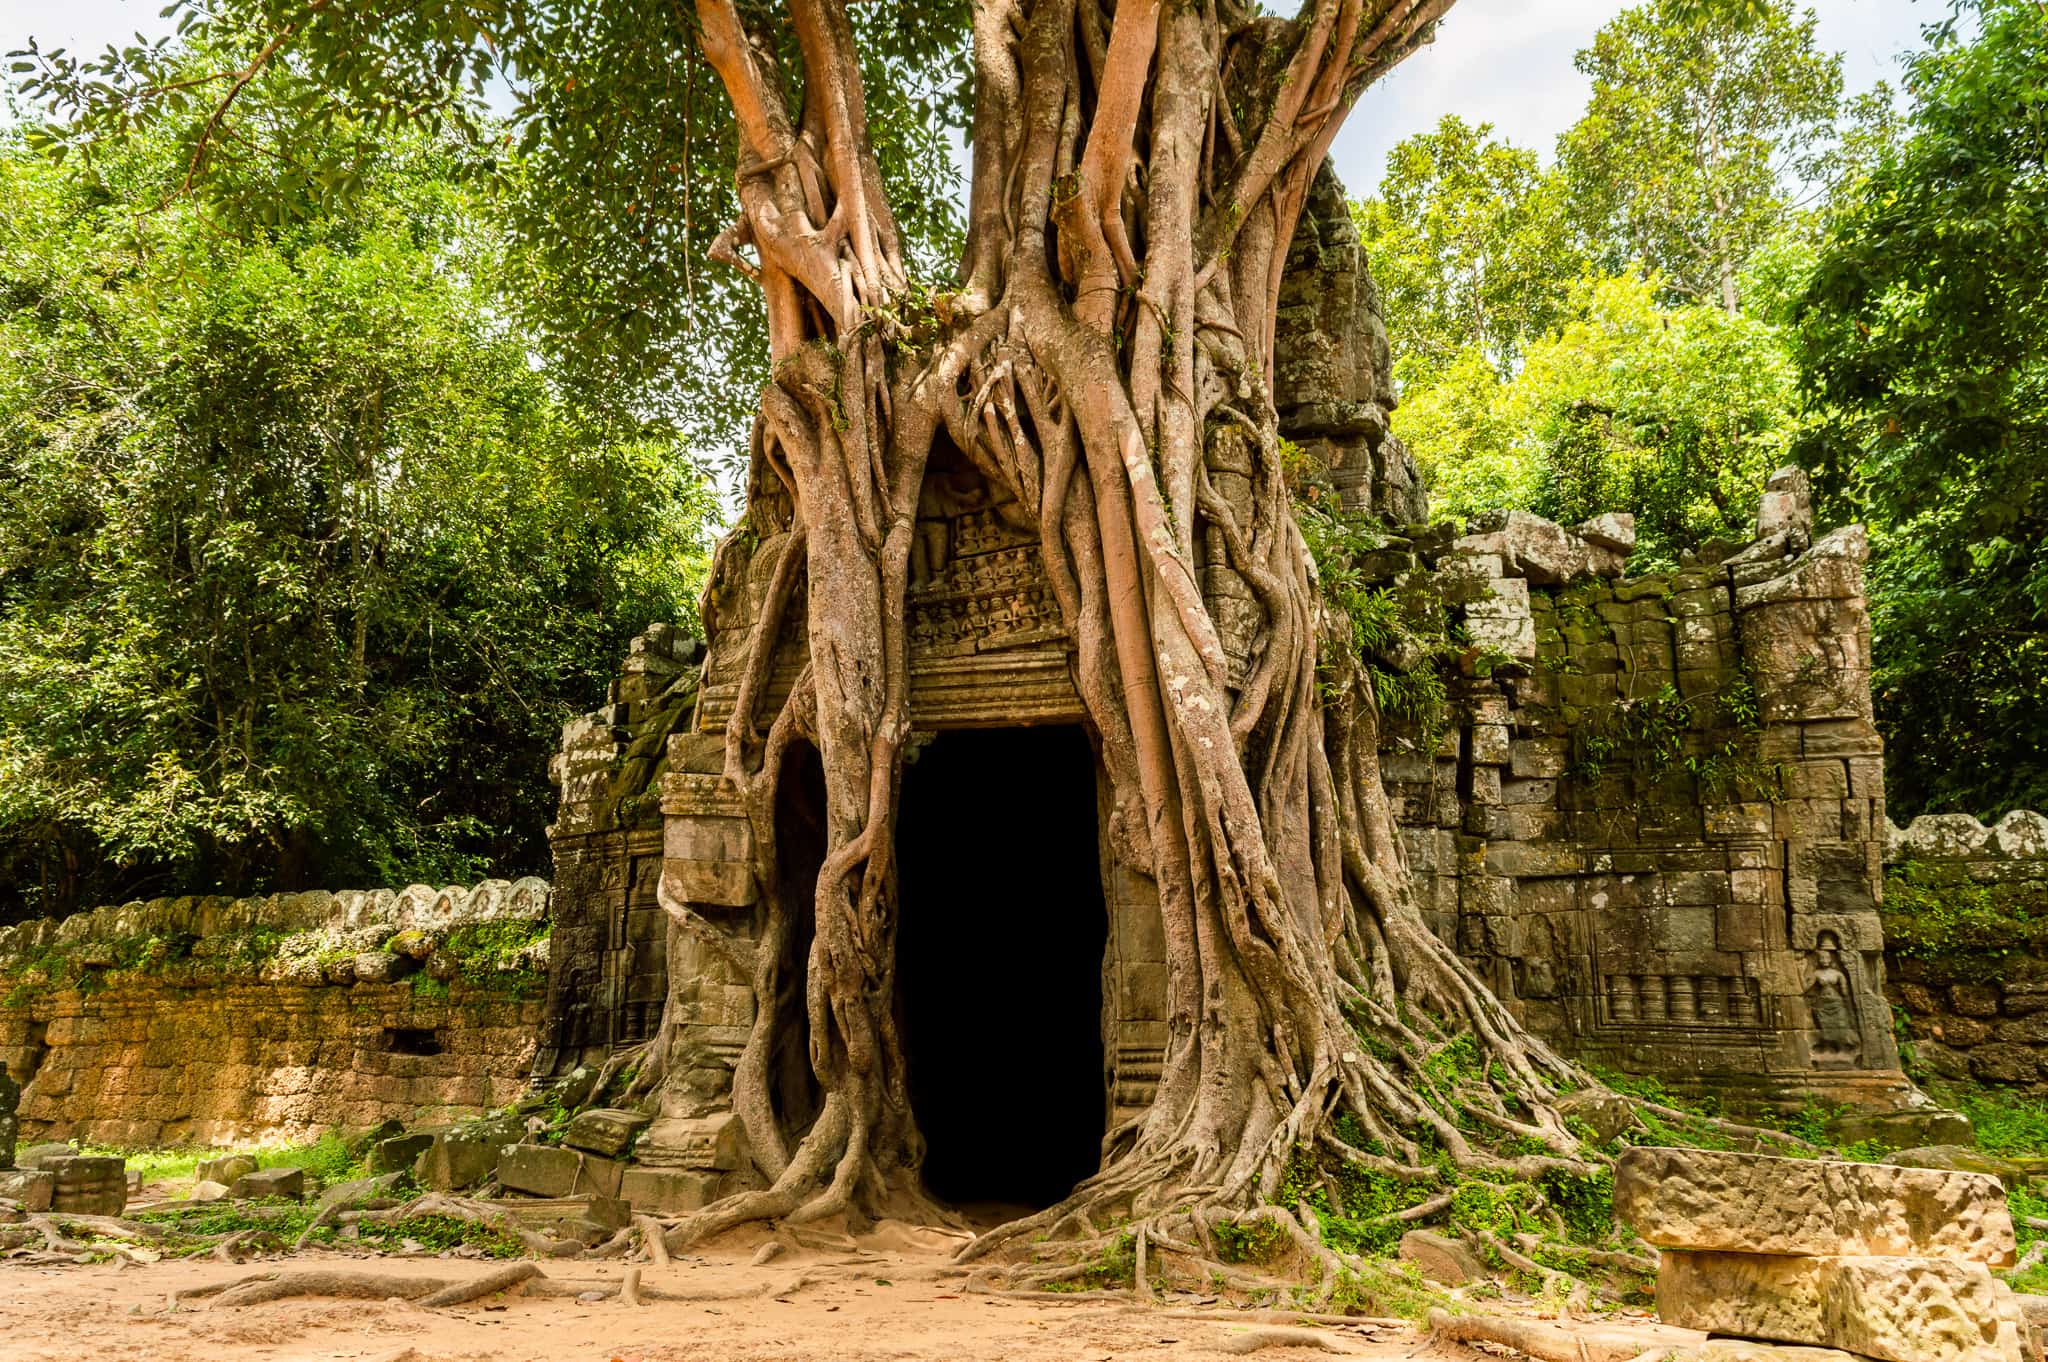 Many trees engulf ancient structures like this around Angkor Wat in Cambodia